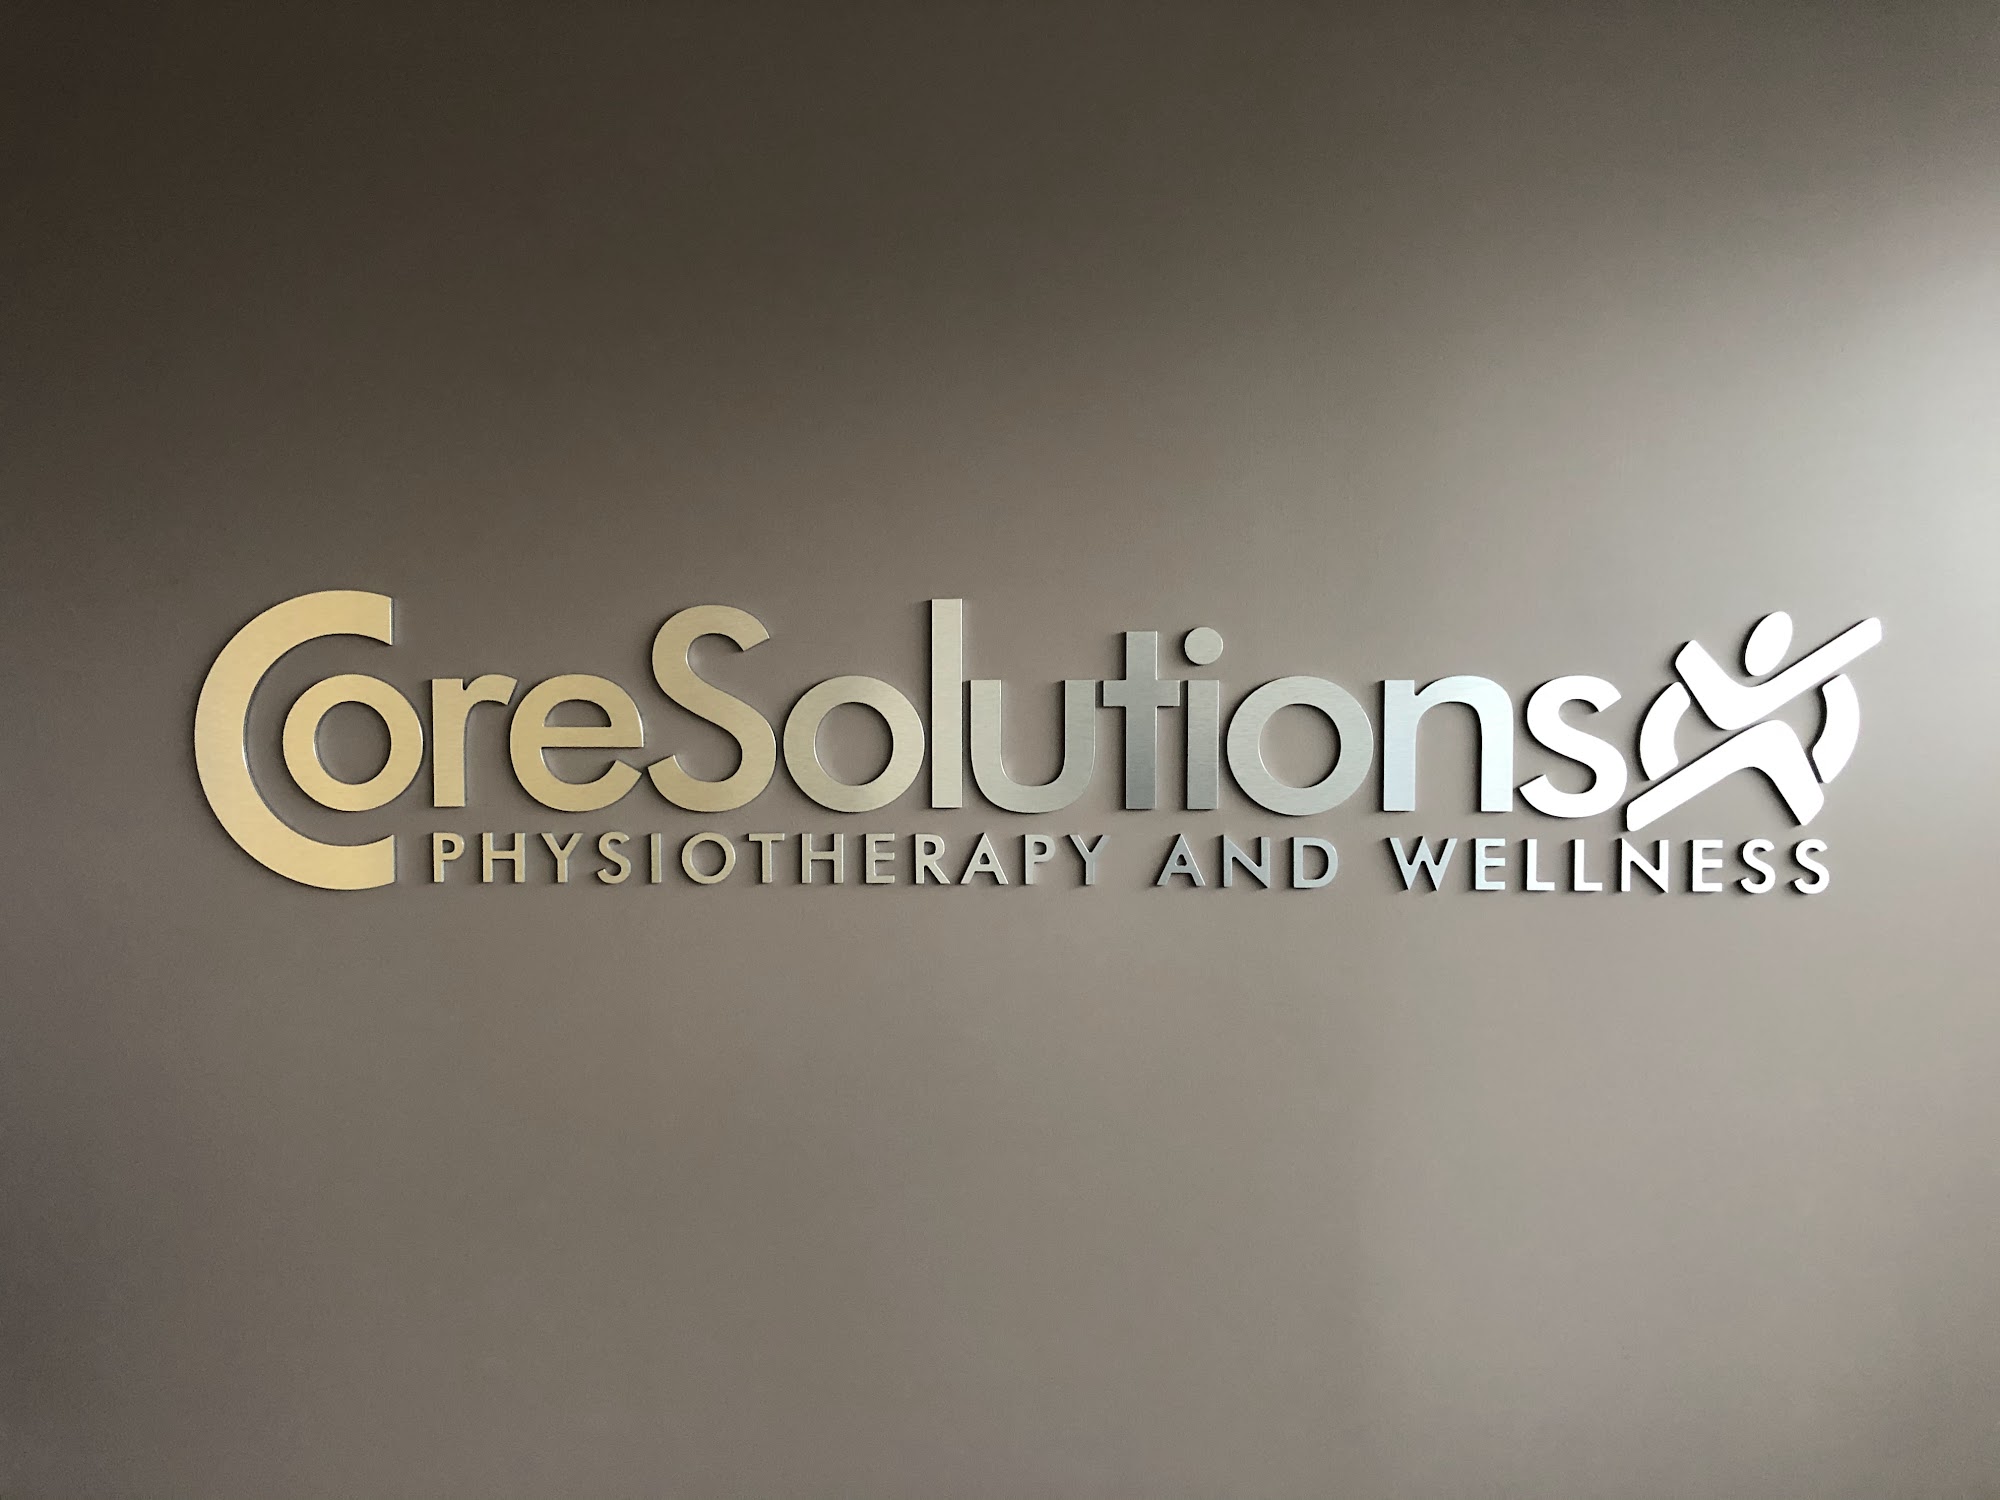 Core Solutions Physiotherapy and Wellness 50 Dr Kay Dr Unit A8, Schomberg Ontario L0G 1T0